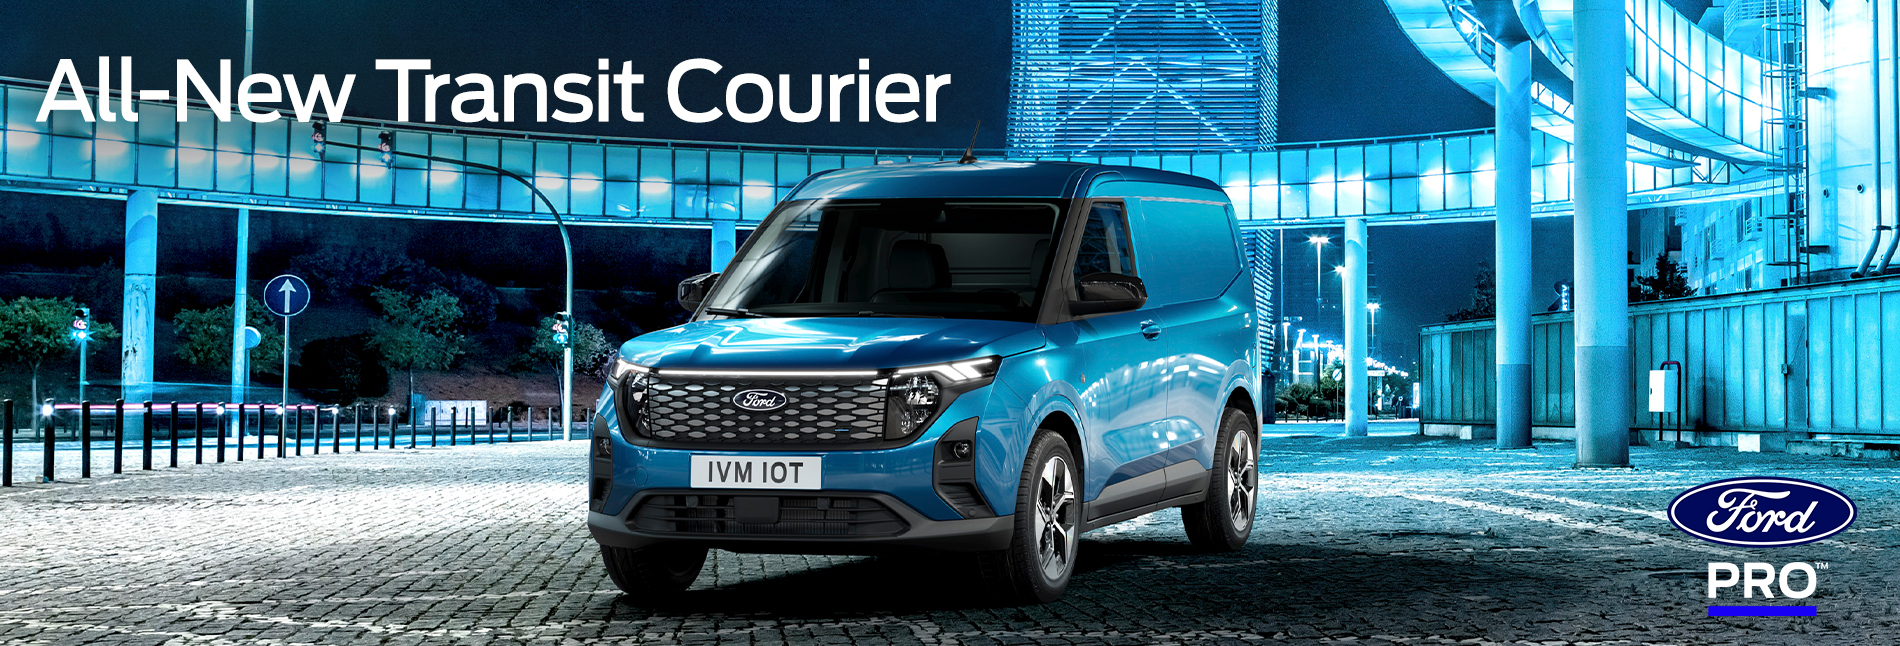 All-New Transit Courier header